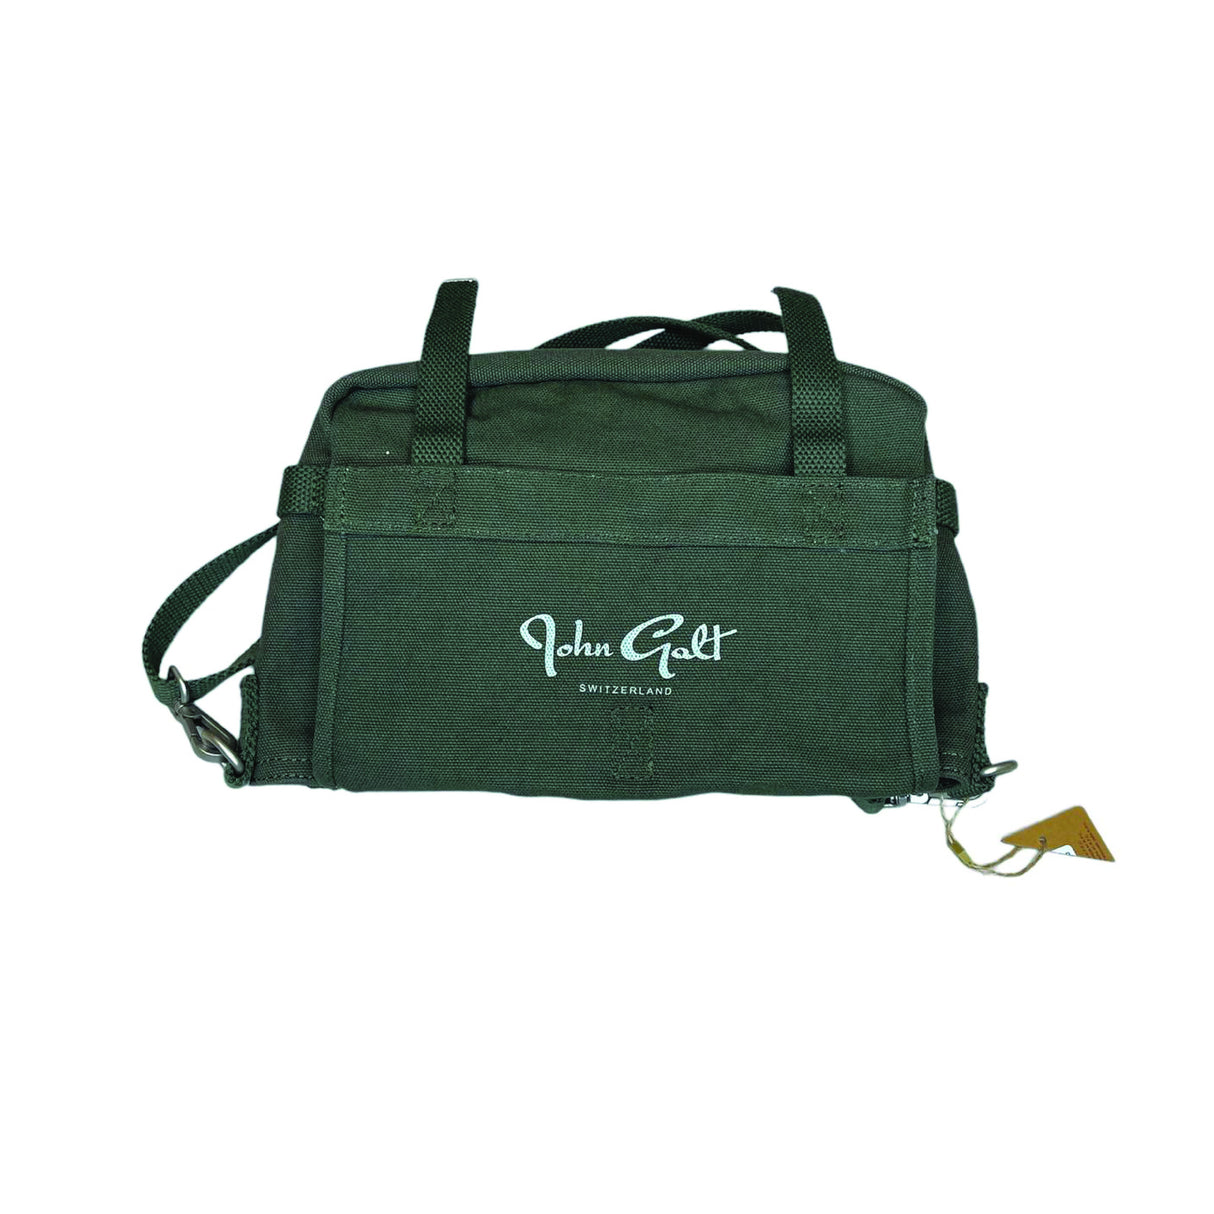 A Second Chance - John Galt Bag Green Women - Delivery All Over Lebanon